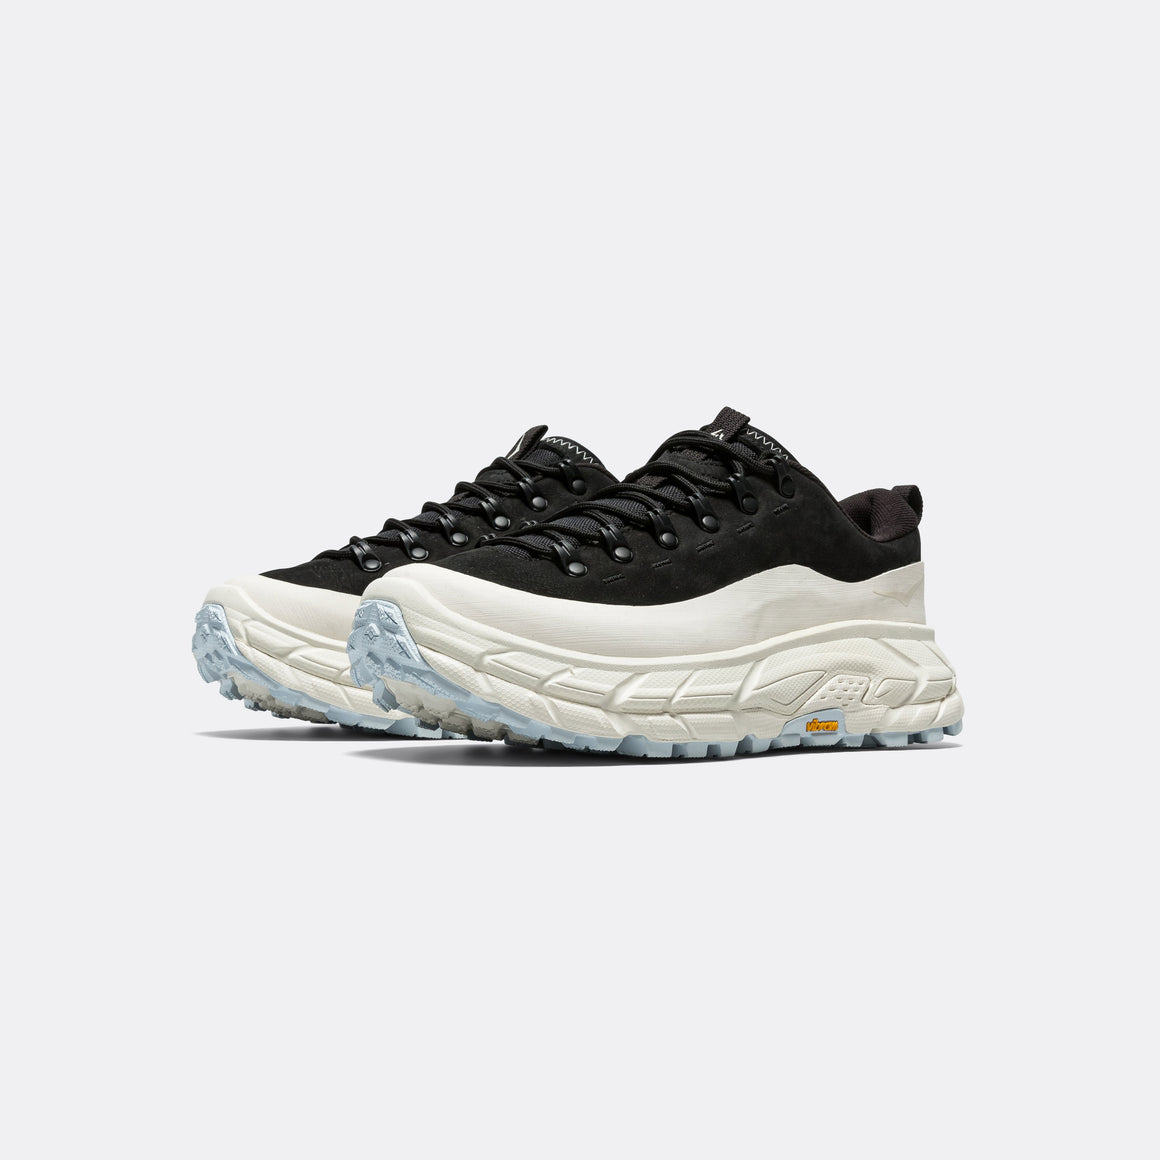 HOKA - Tor Summit × Hidden Characters - Snow White/Black - UP THERE